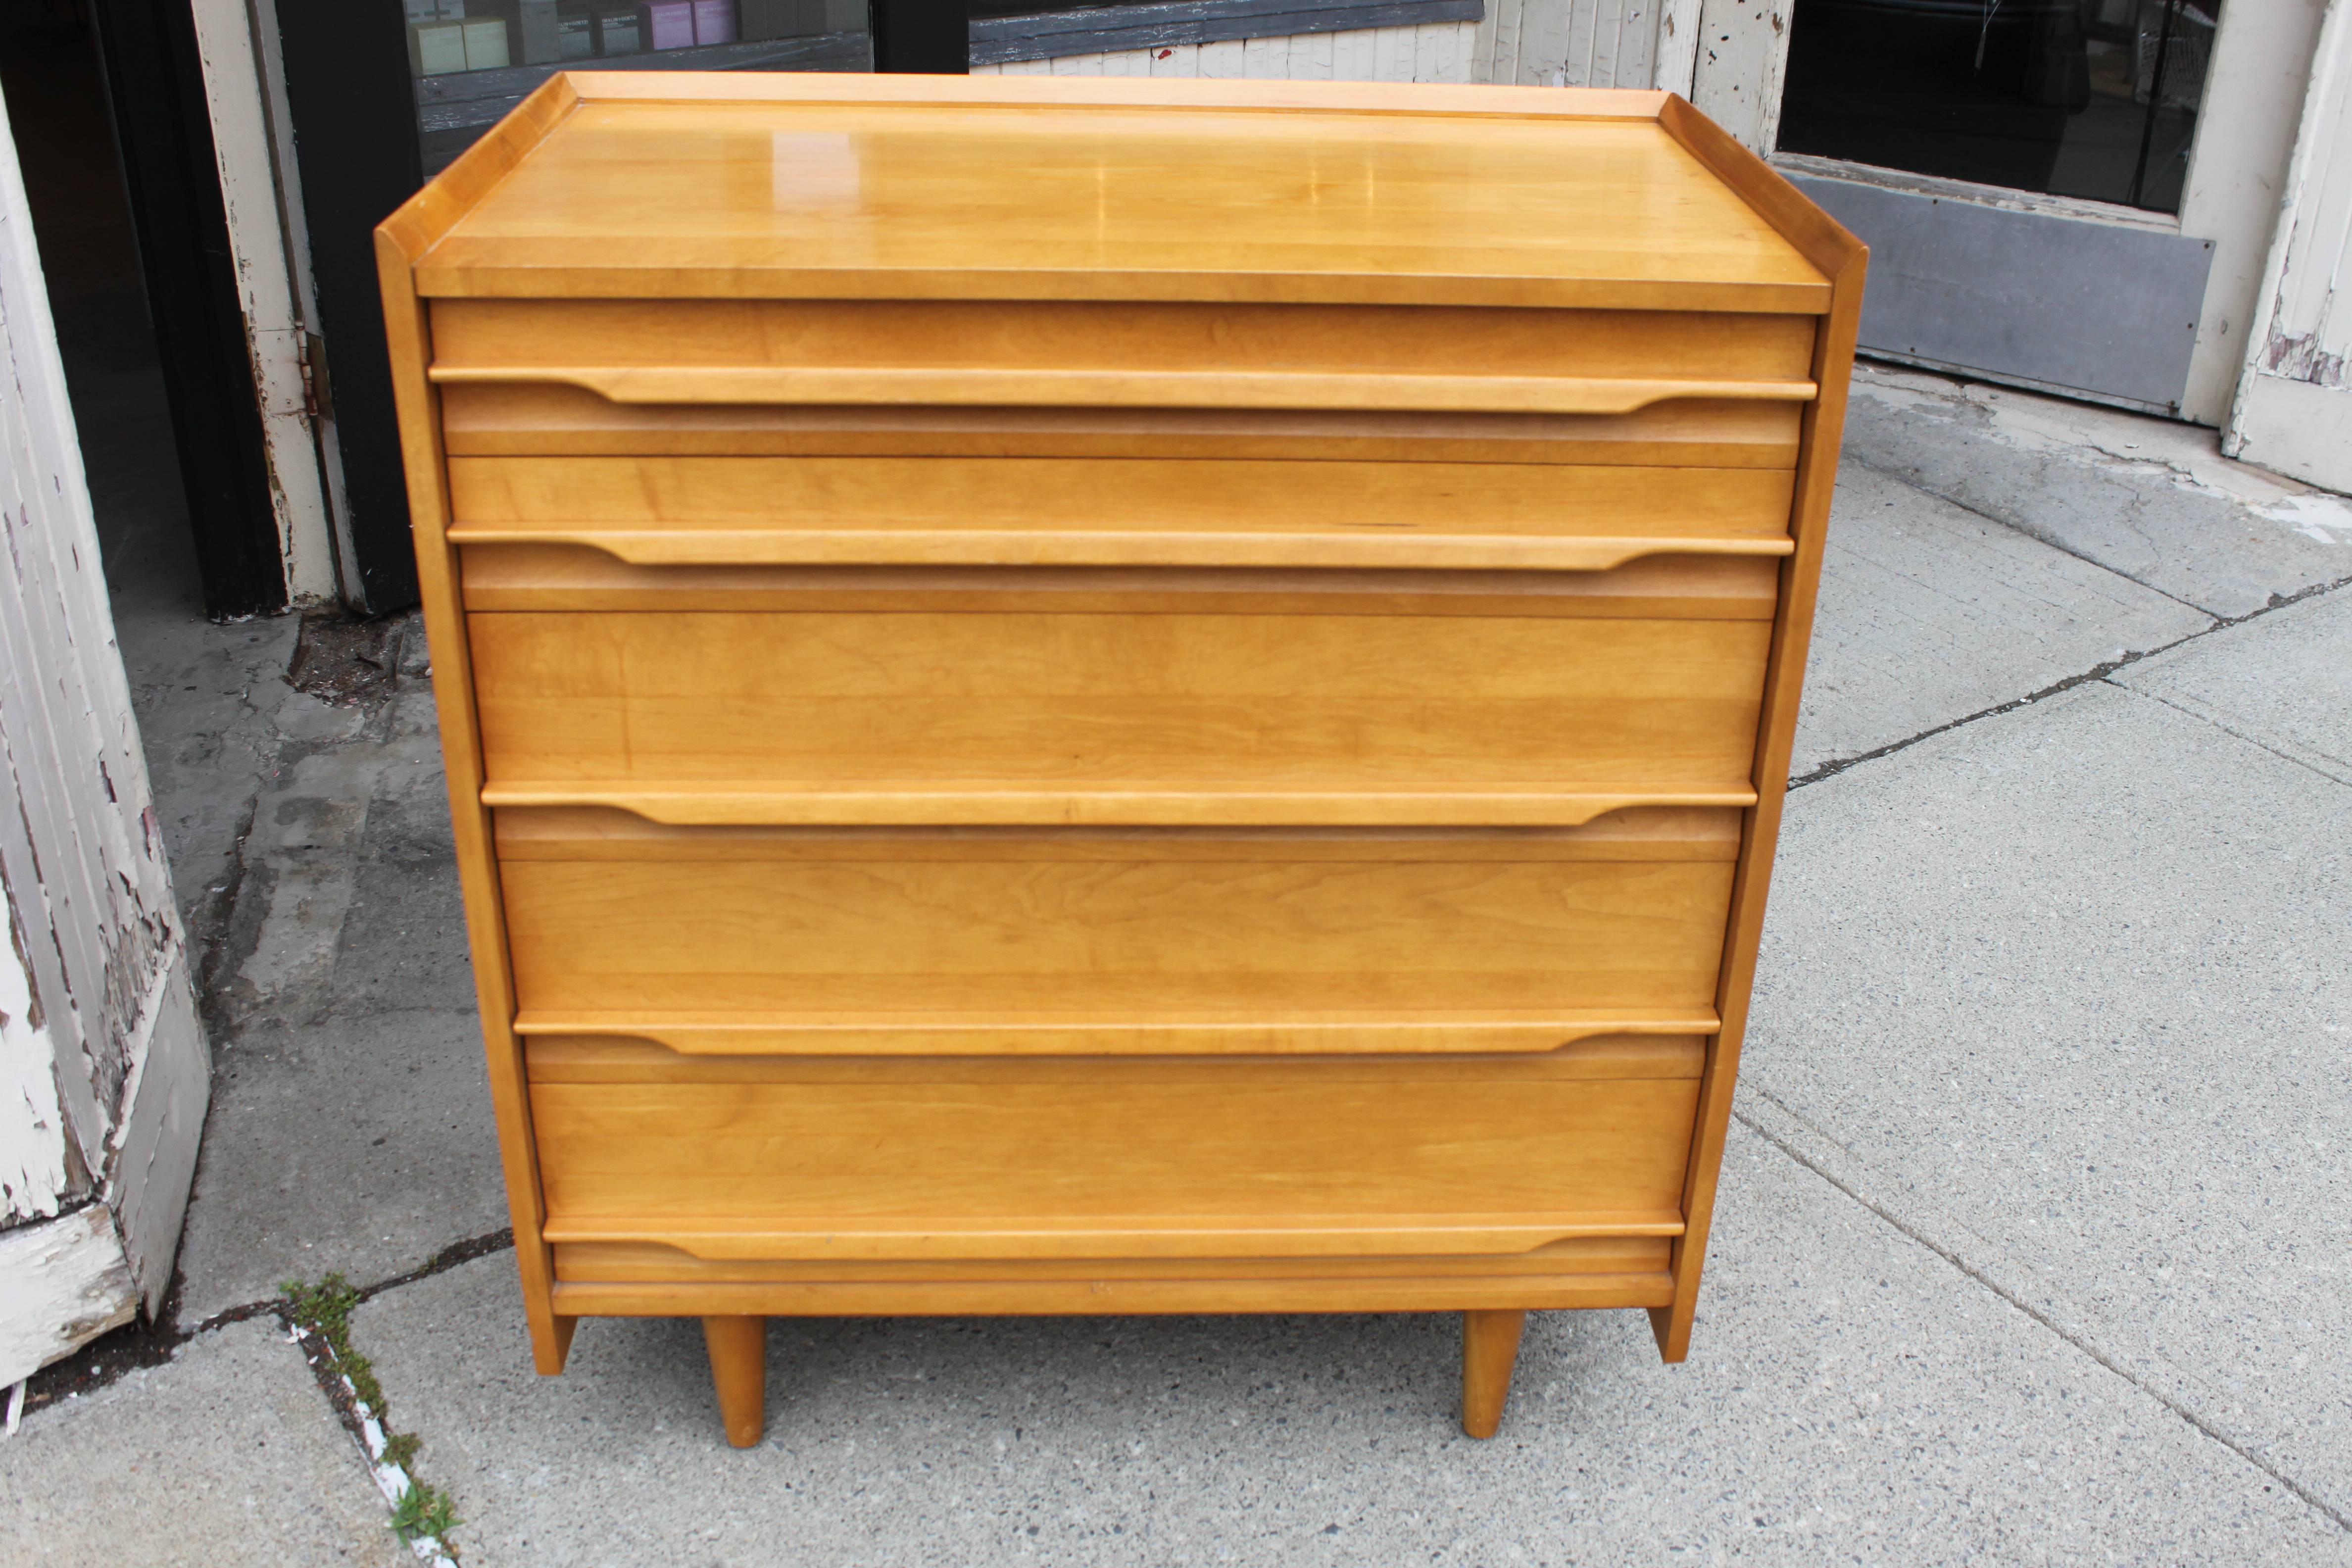 Five-drawer dresser in solid maple. Wide sculpted pulls. In very good condition.